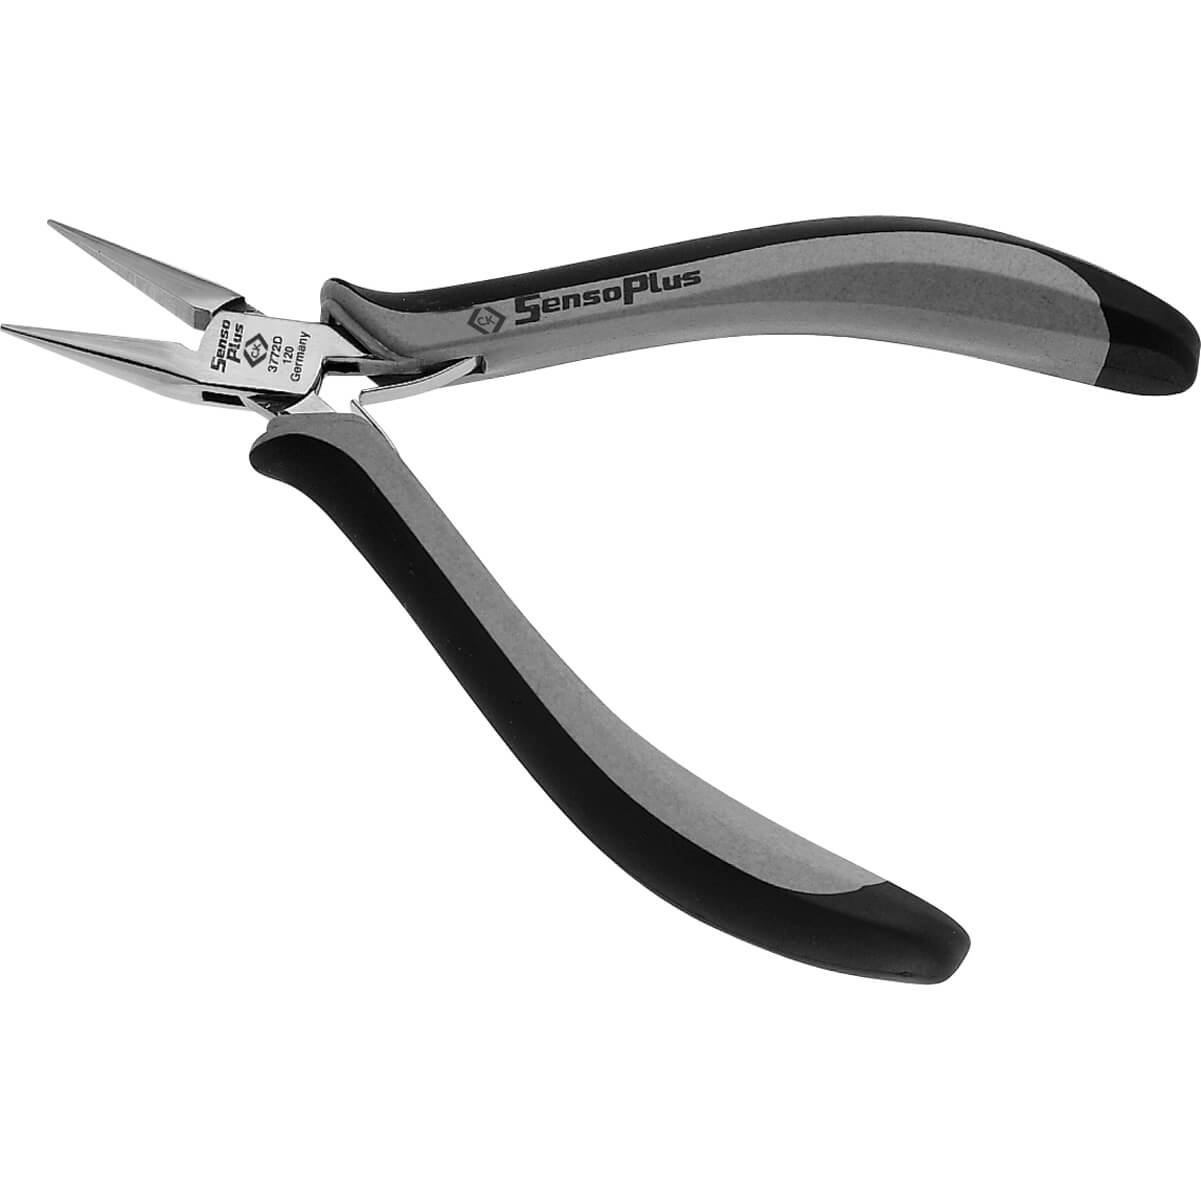 Image of CK SensoPlus ESD Snipe Nose Smooth Jaws Pliers 120mm